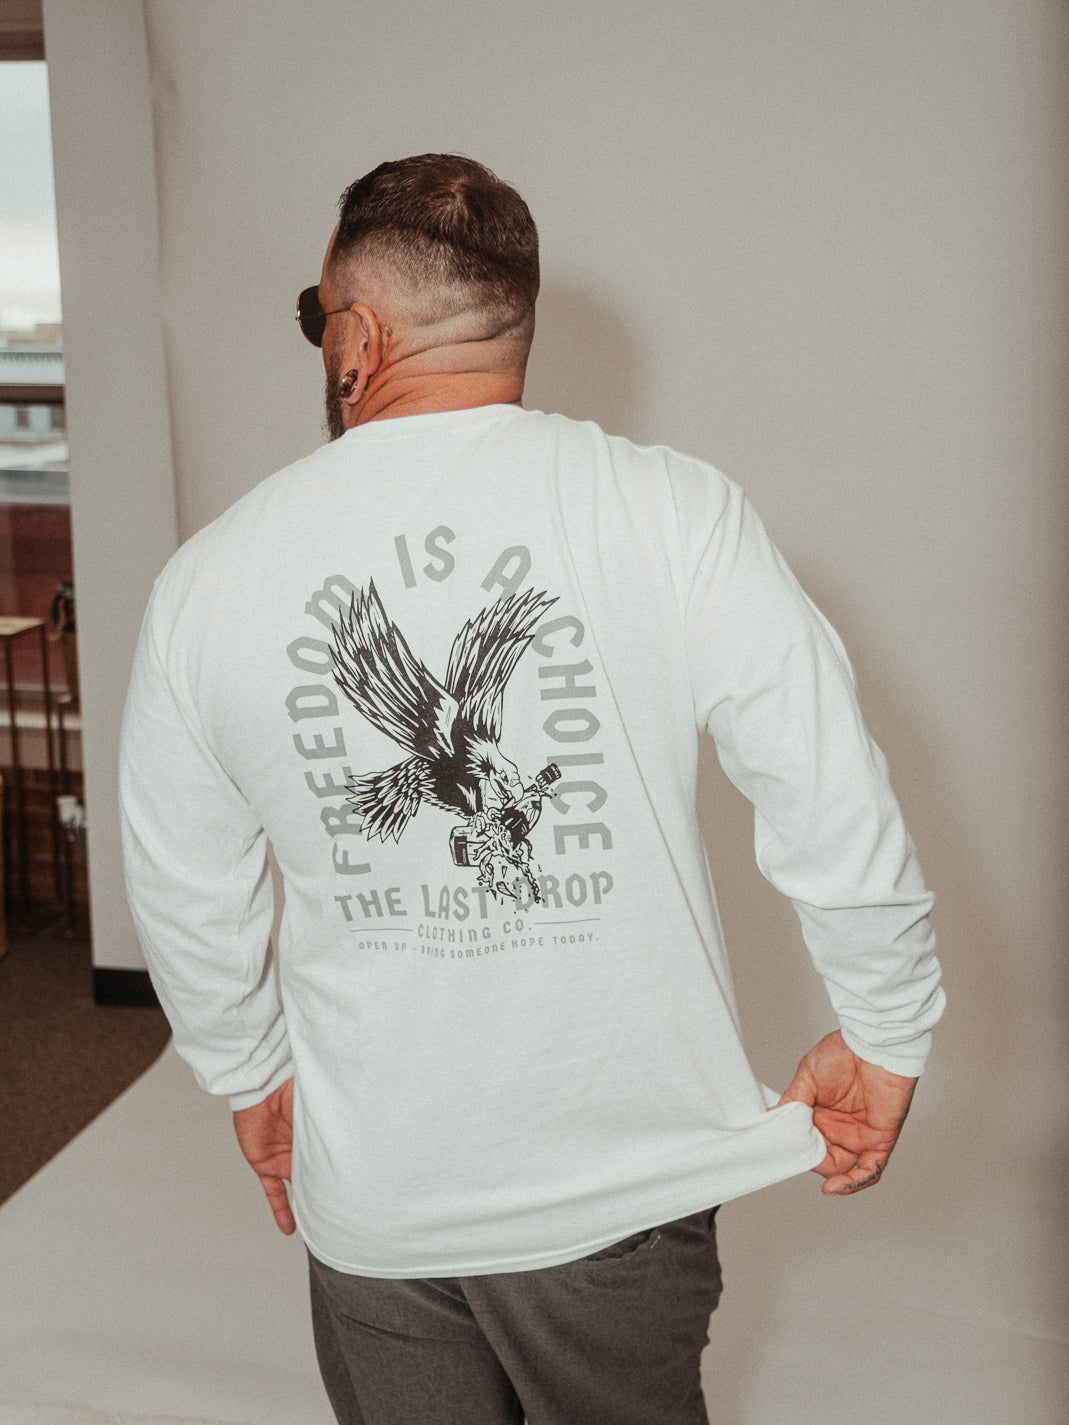 A man showcasing his strength and independence in a white long-sleeve shirt embellished with a powerful eagle design.